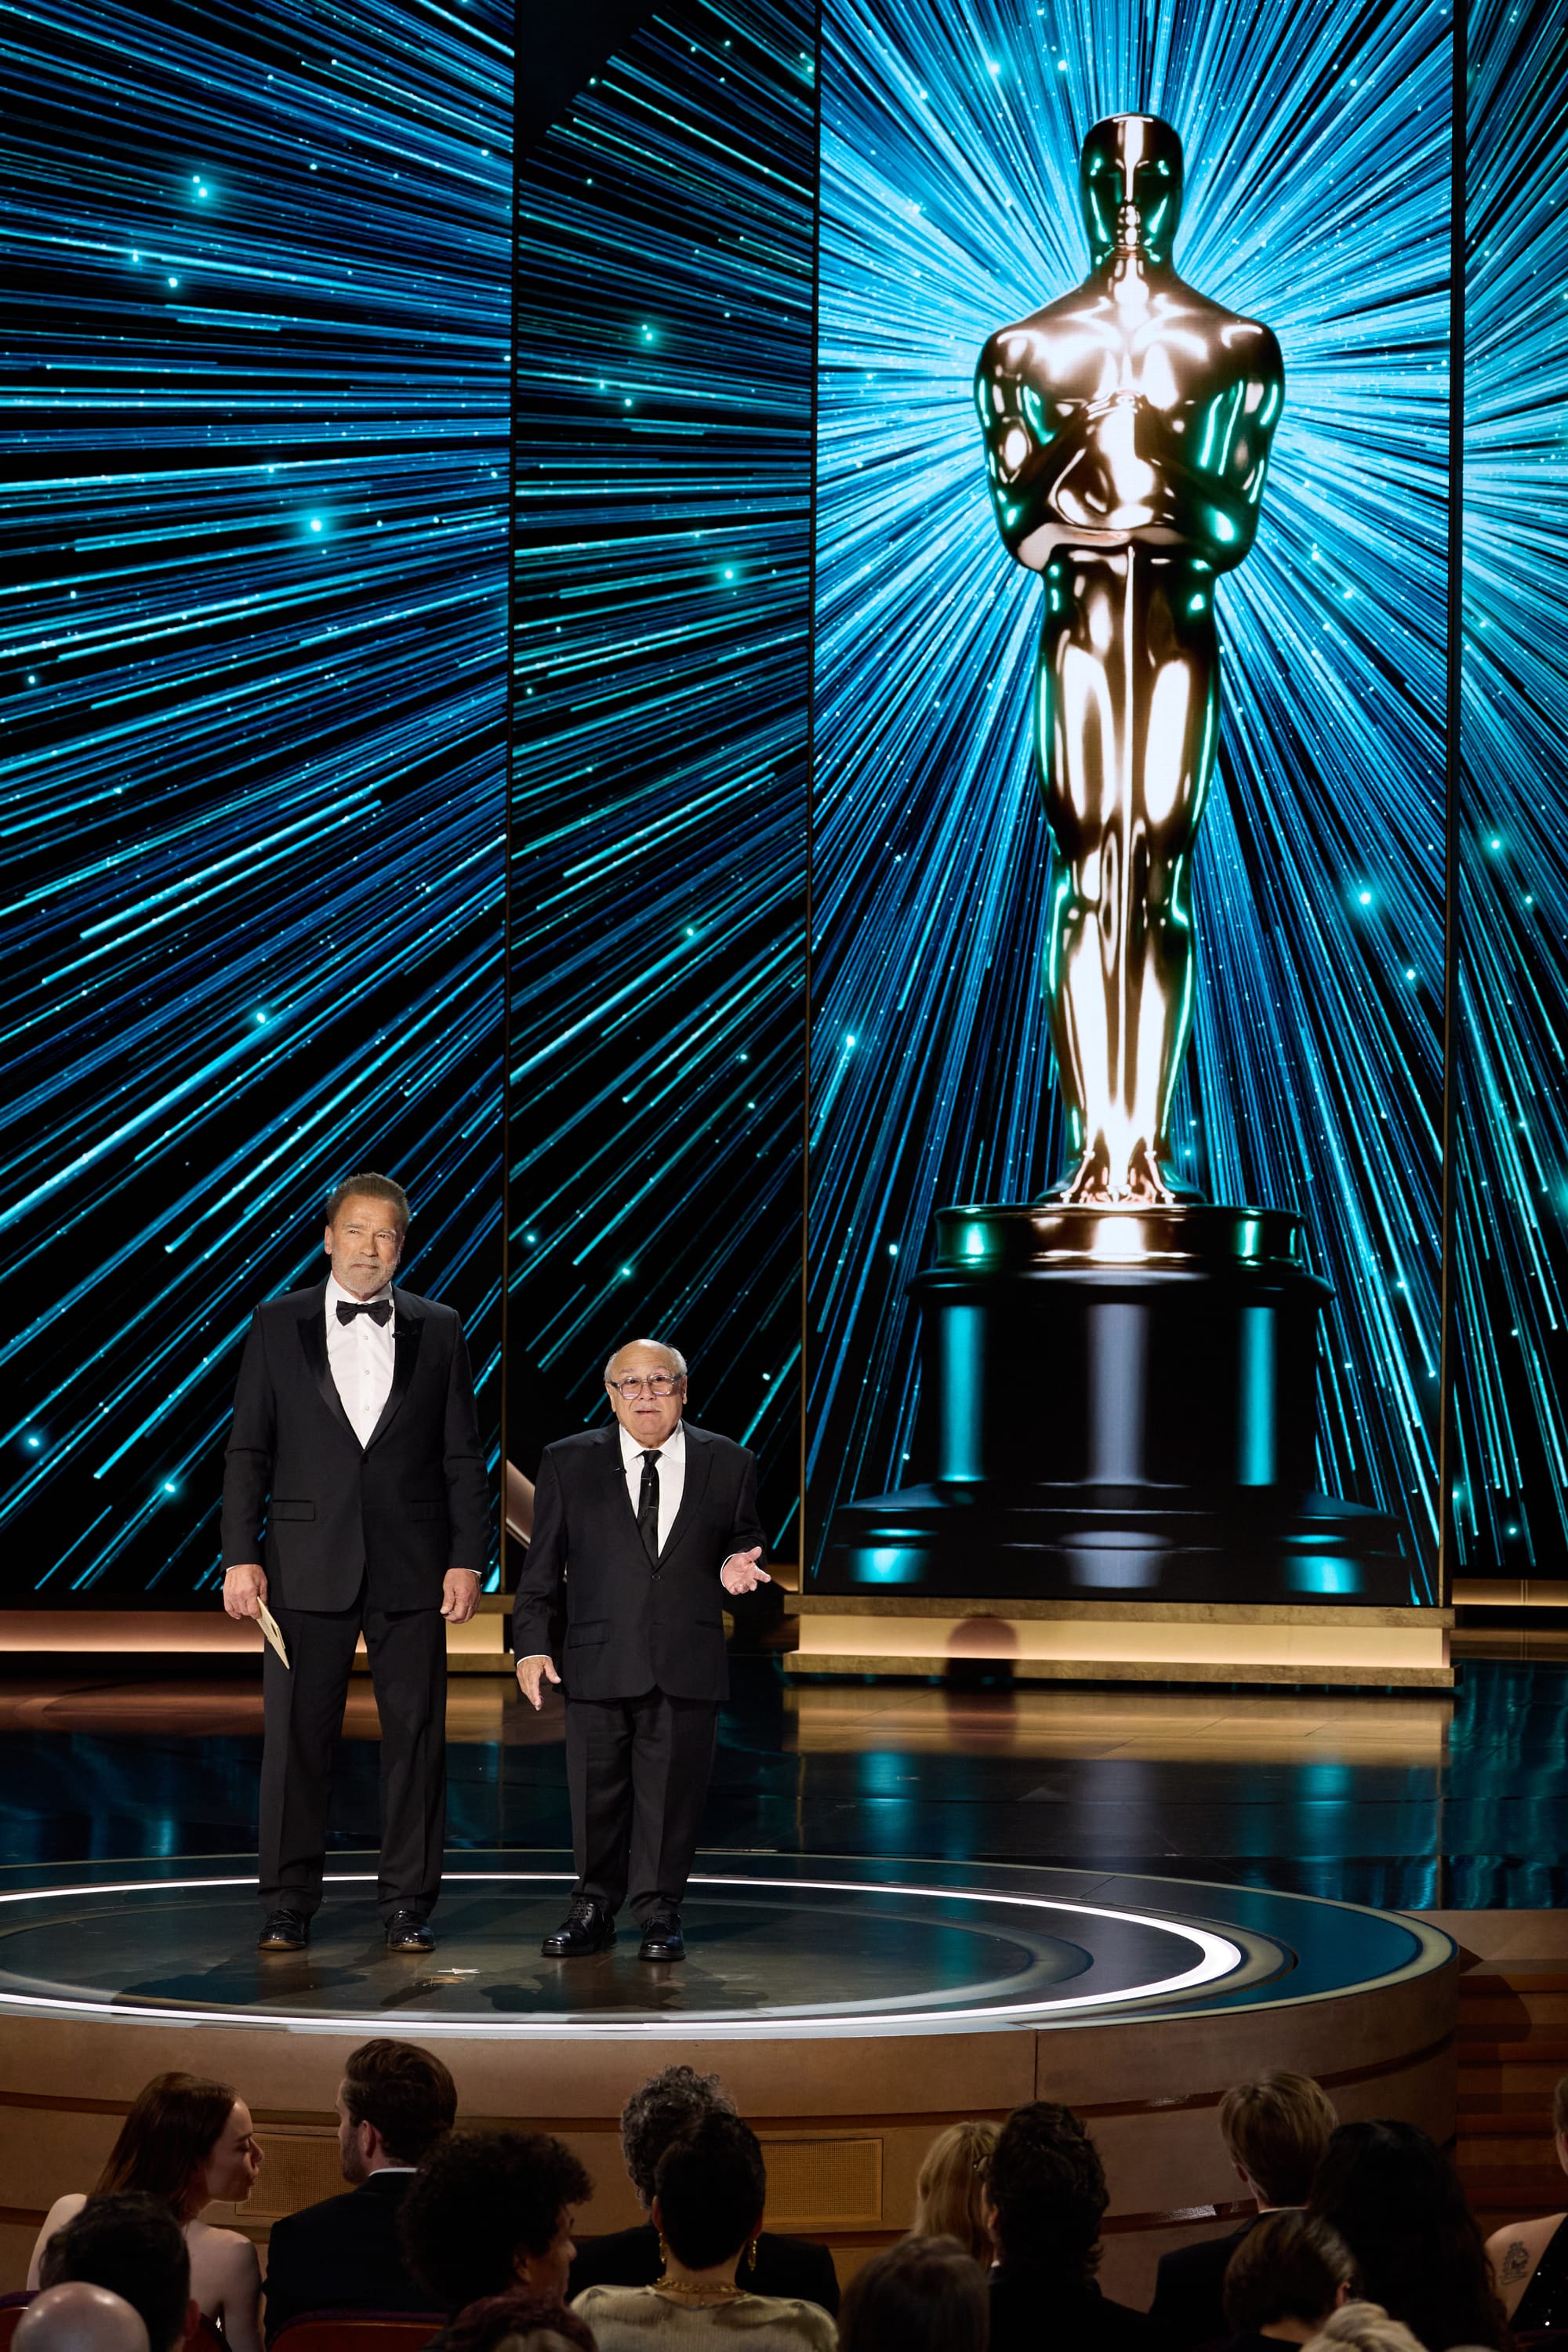 Arnold Schwarzeneger and Danny DeVito stand onstage in front of a large Oscar statuette